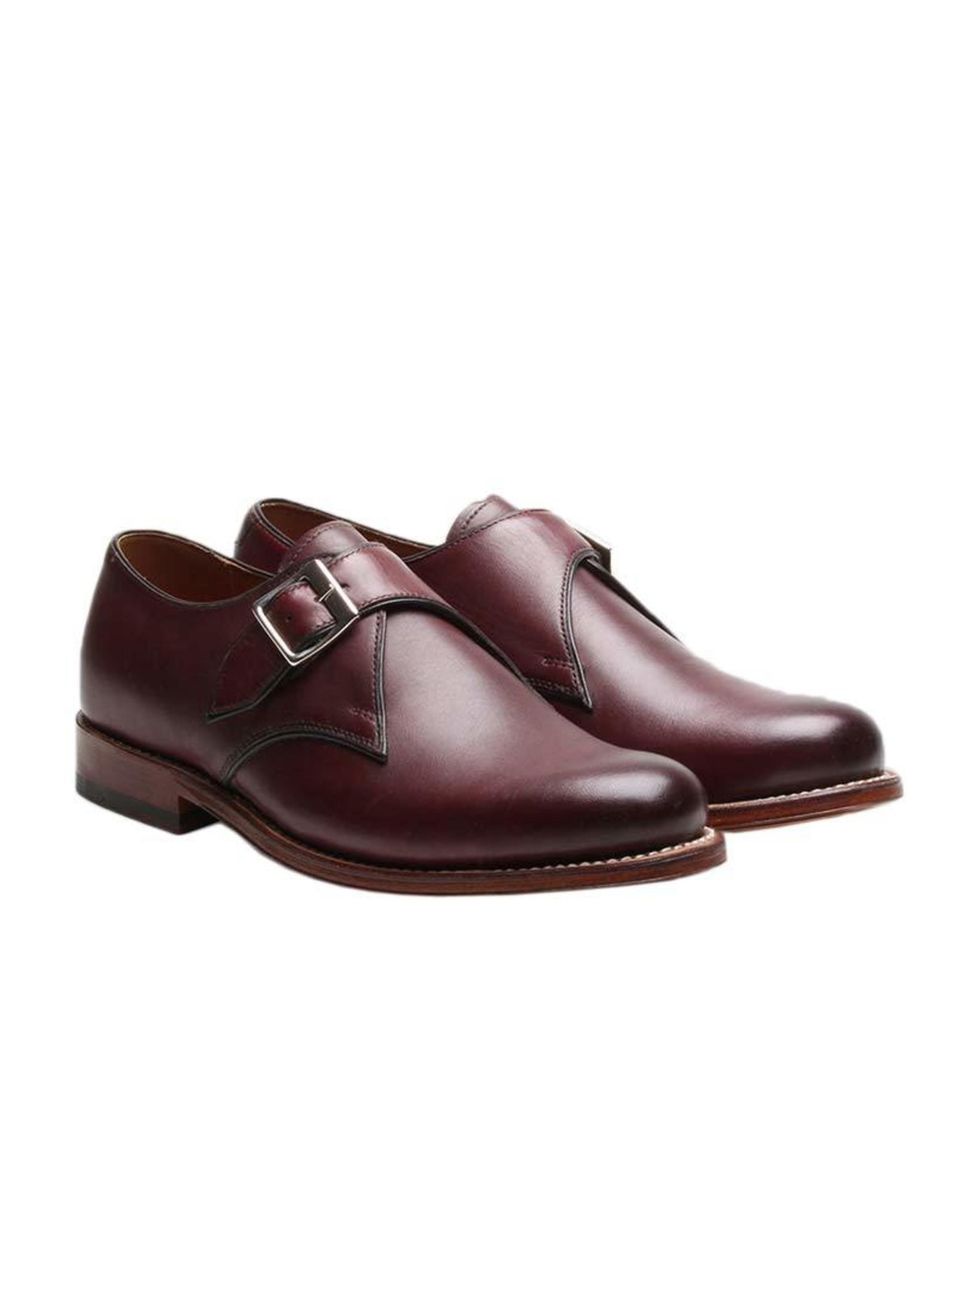 <p>The perfect androgynous flat to help your wardrobe transition into autumn.</p>

<p> </p>

<p><a href="http://www.grenson.co.uk/en_gb/shop/sophie-10958" target="_blank">Grenson</a> shoes, £190</p>